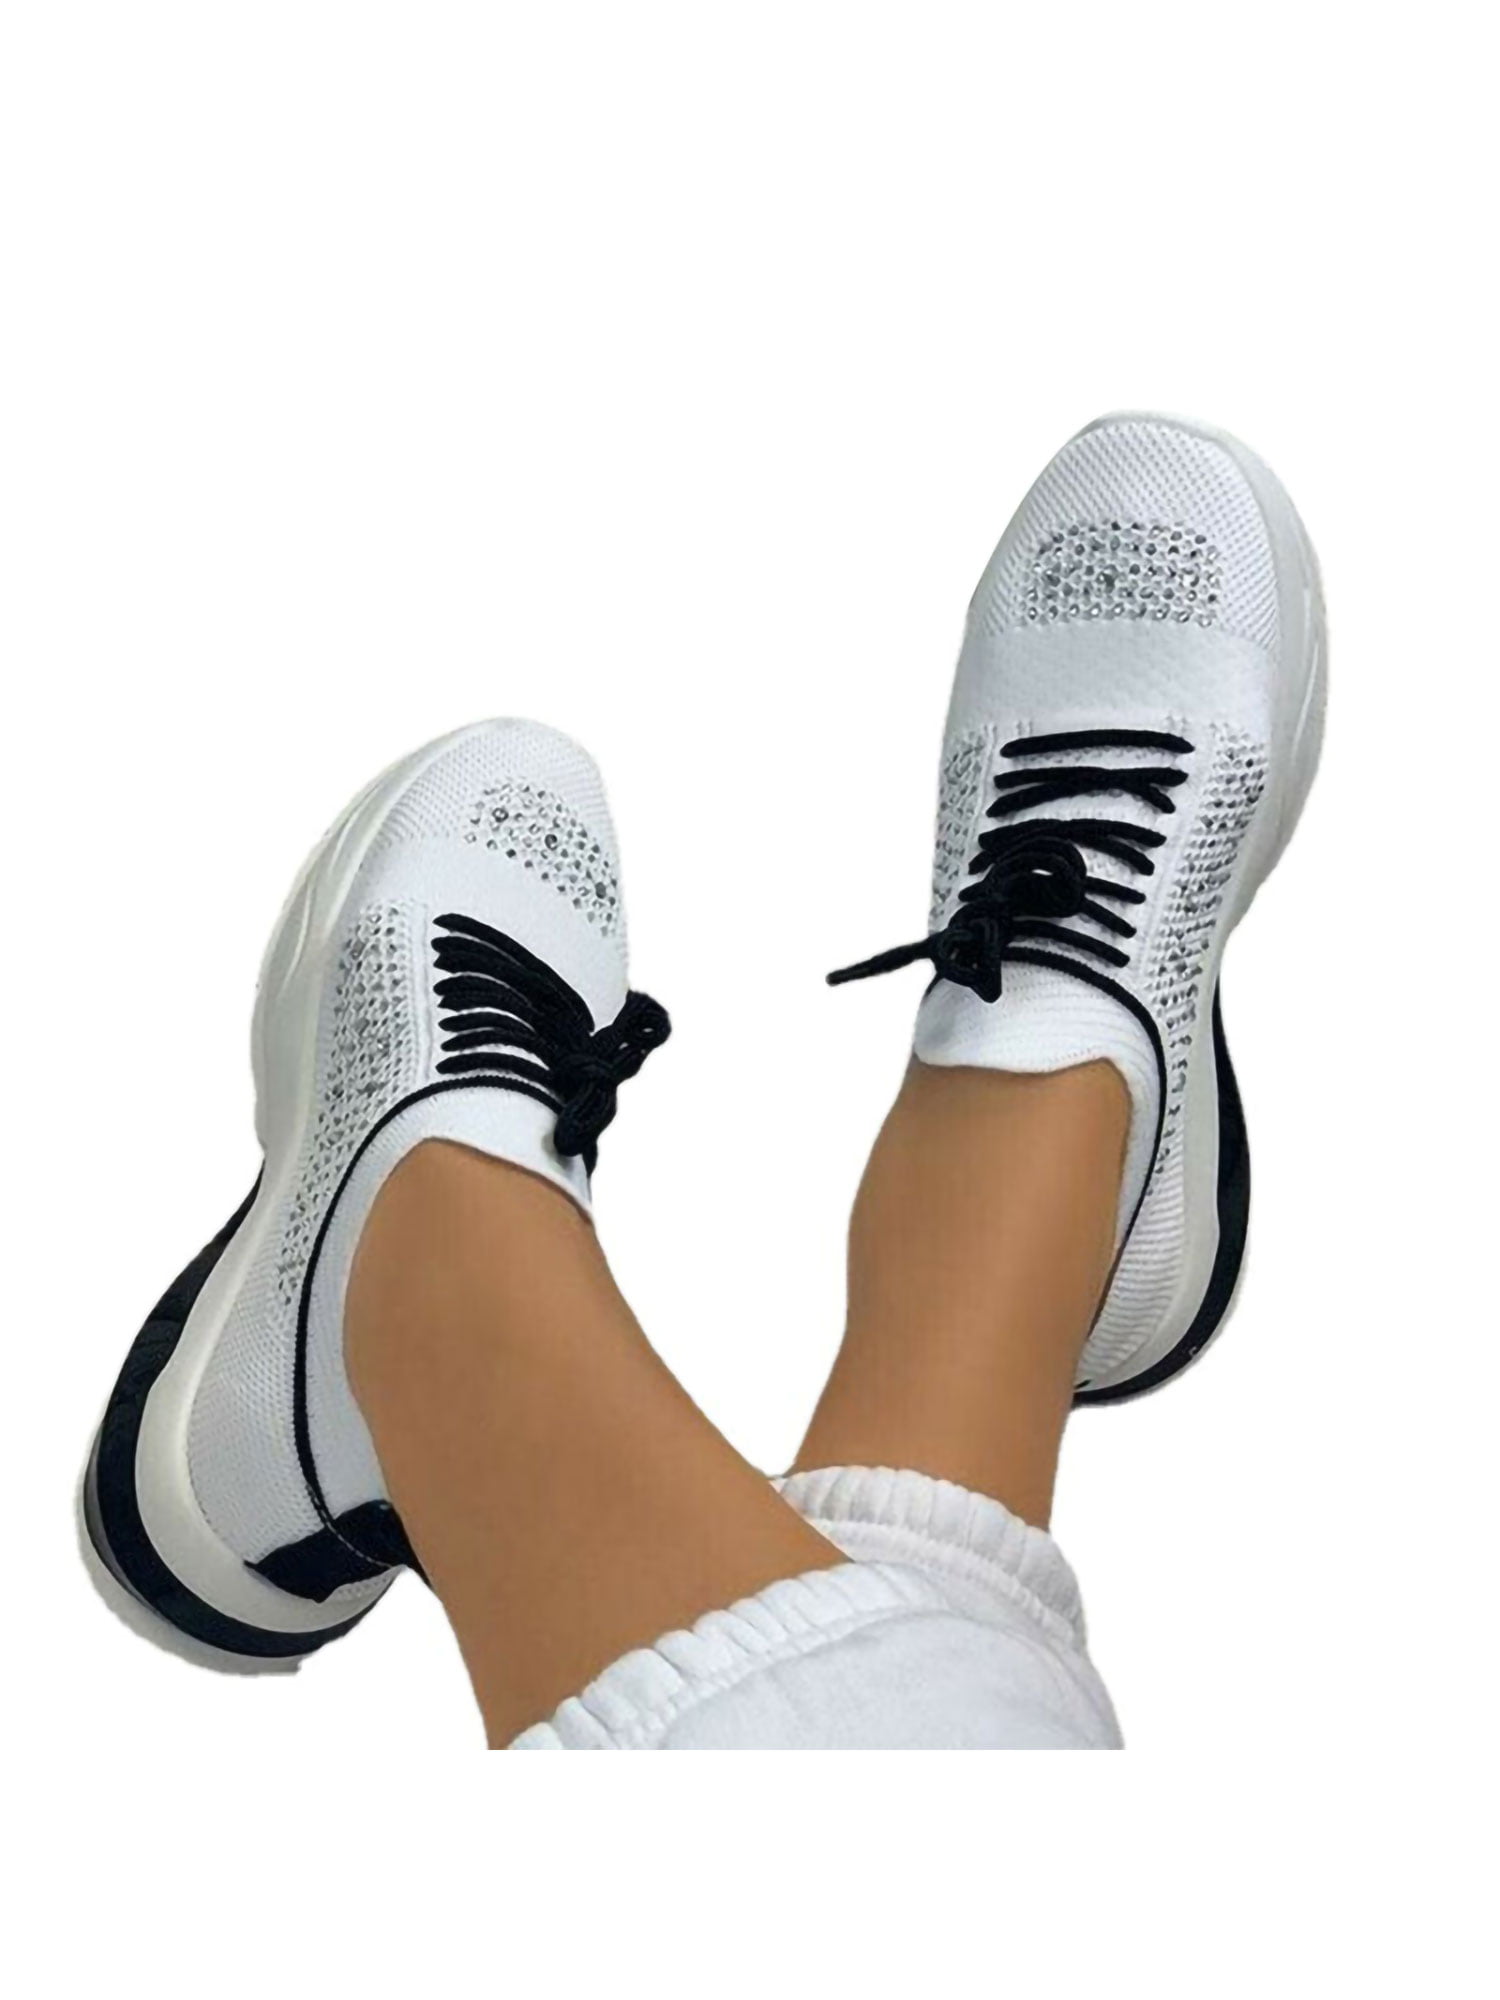 Women Gym Sports Sneakers Mesh Breathable Walking Bling Rhinestone Casual Shoes 